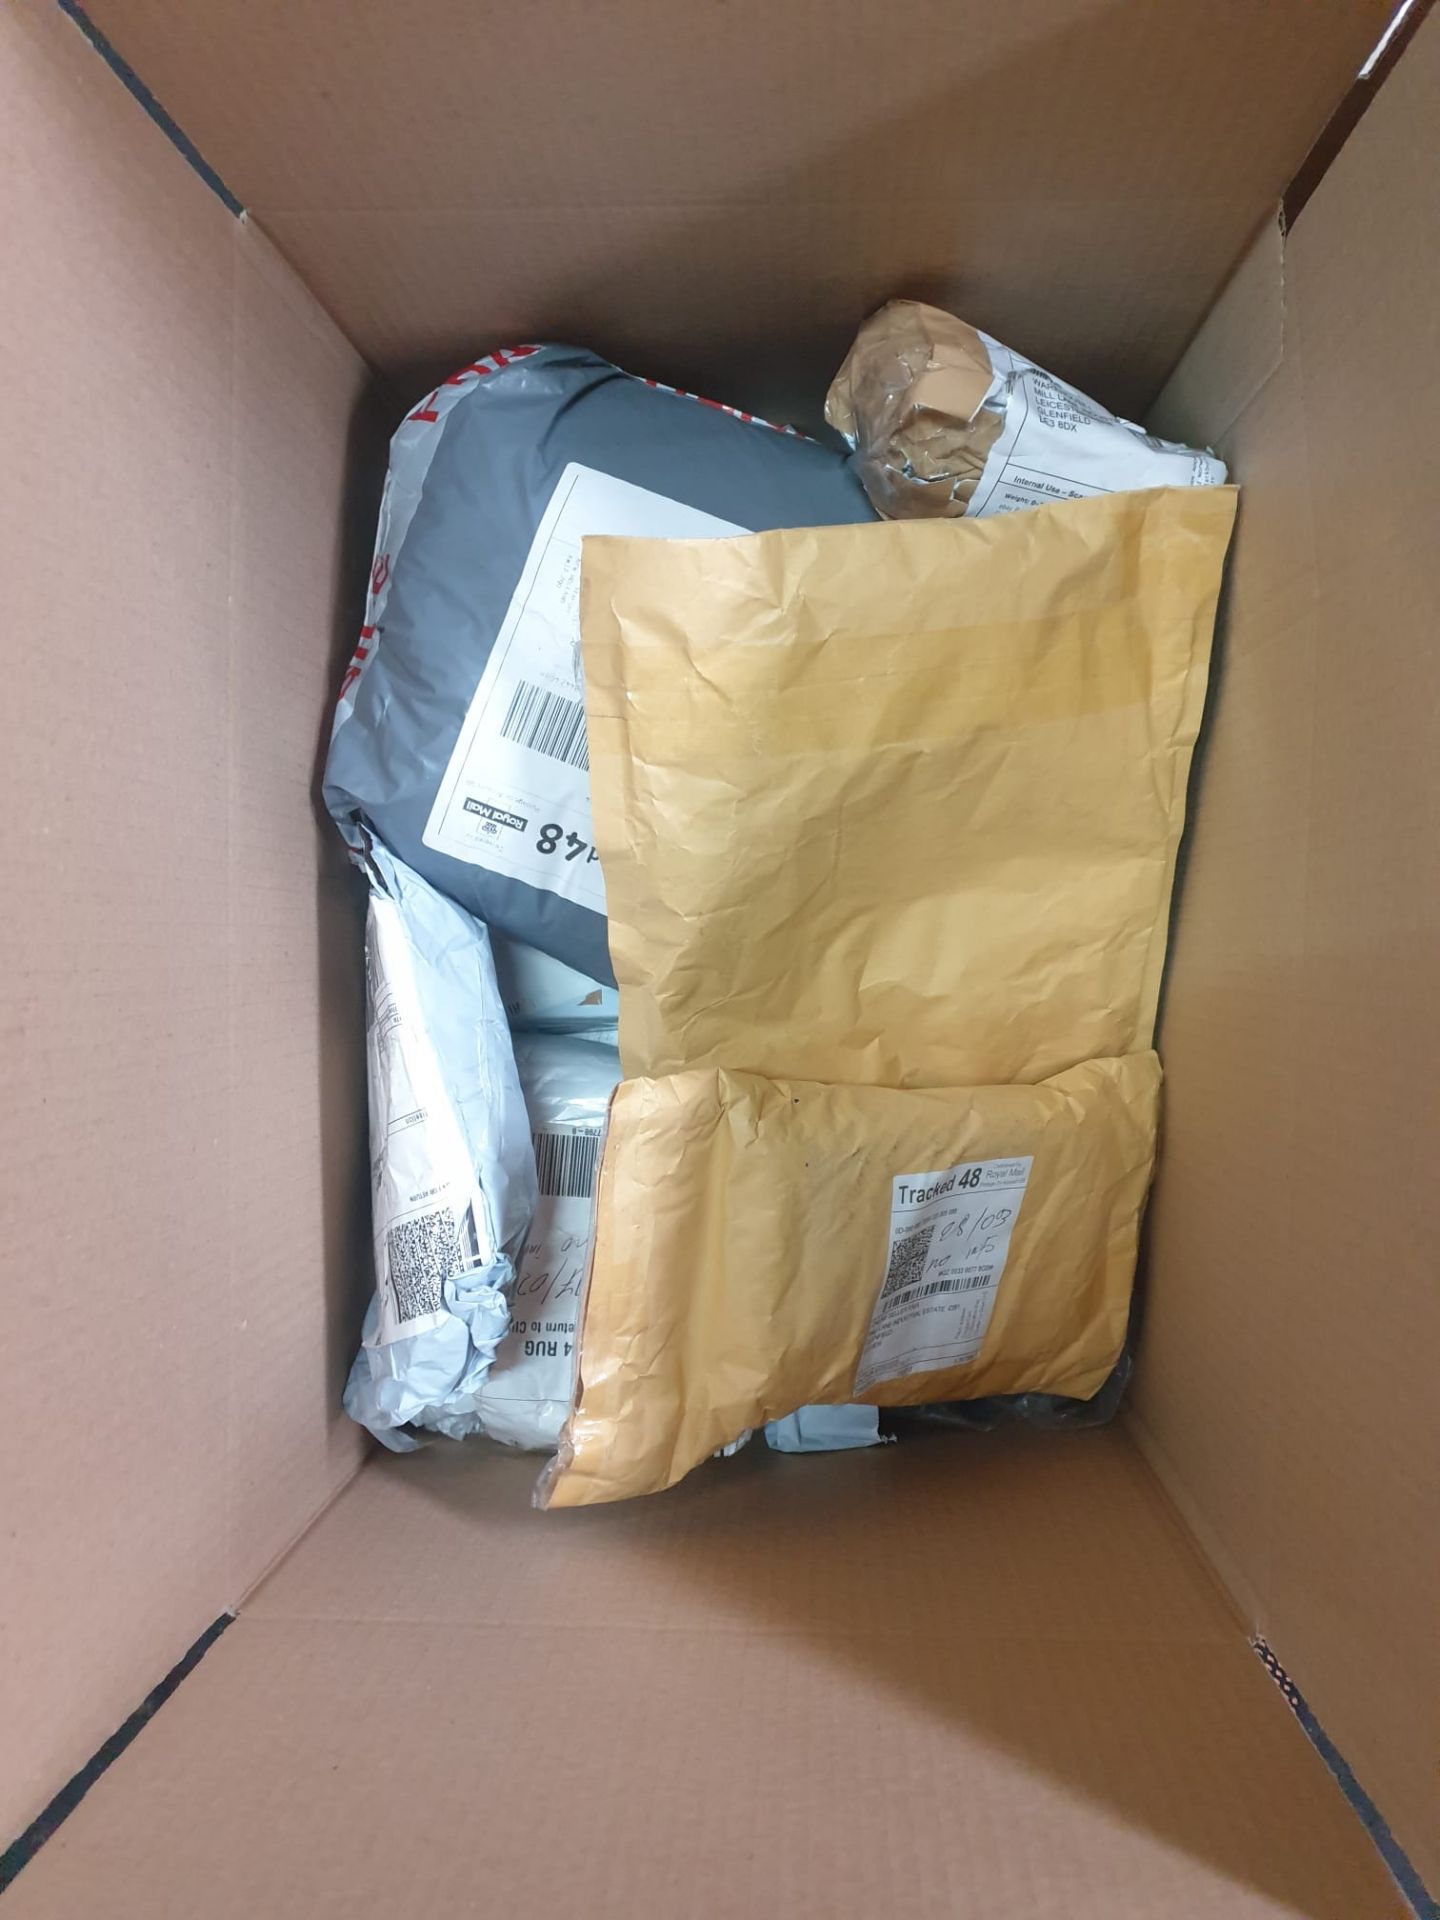 MEGA BULK LOT TO CONTAIN 1000 x UNCHECKED COURIER/INTERNET RETURNS. CONDITION & ITEMS UNKNOWN. - Image 4 of 11